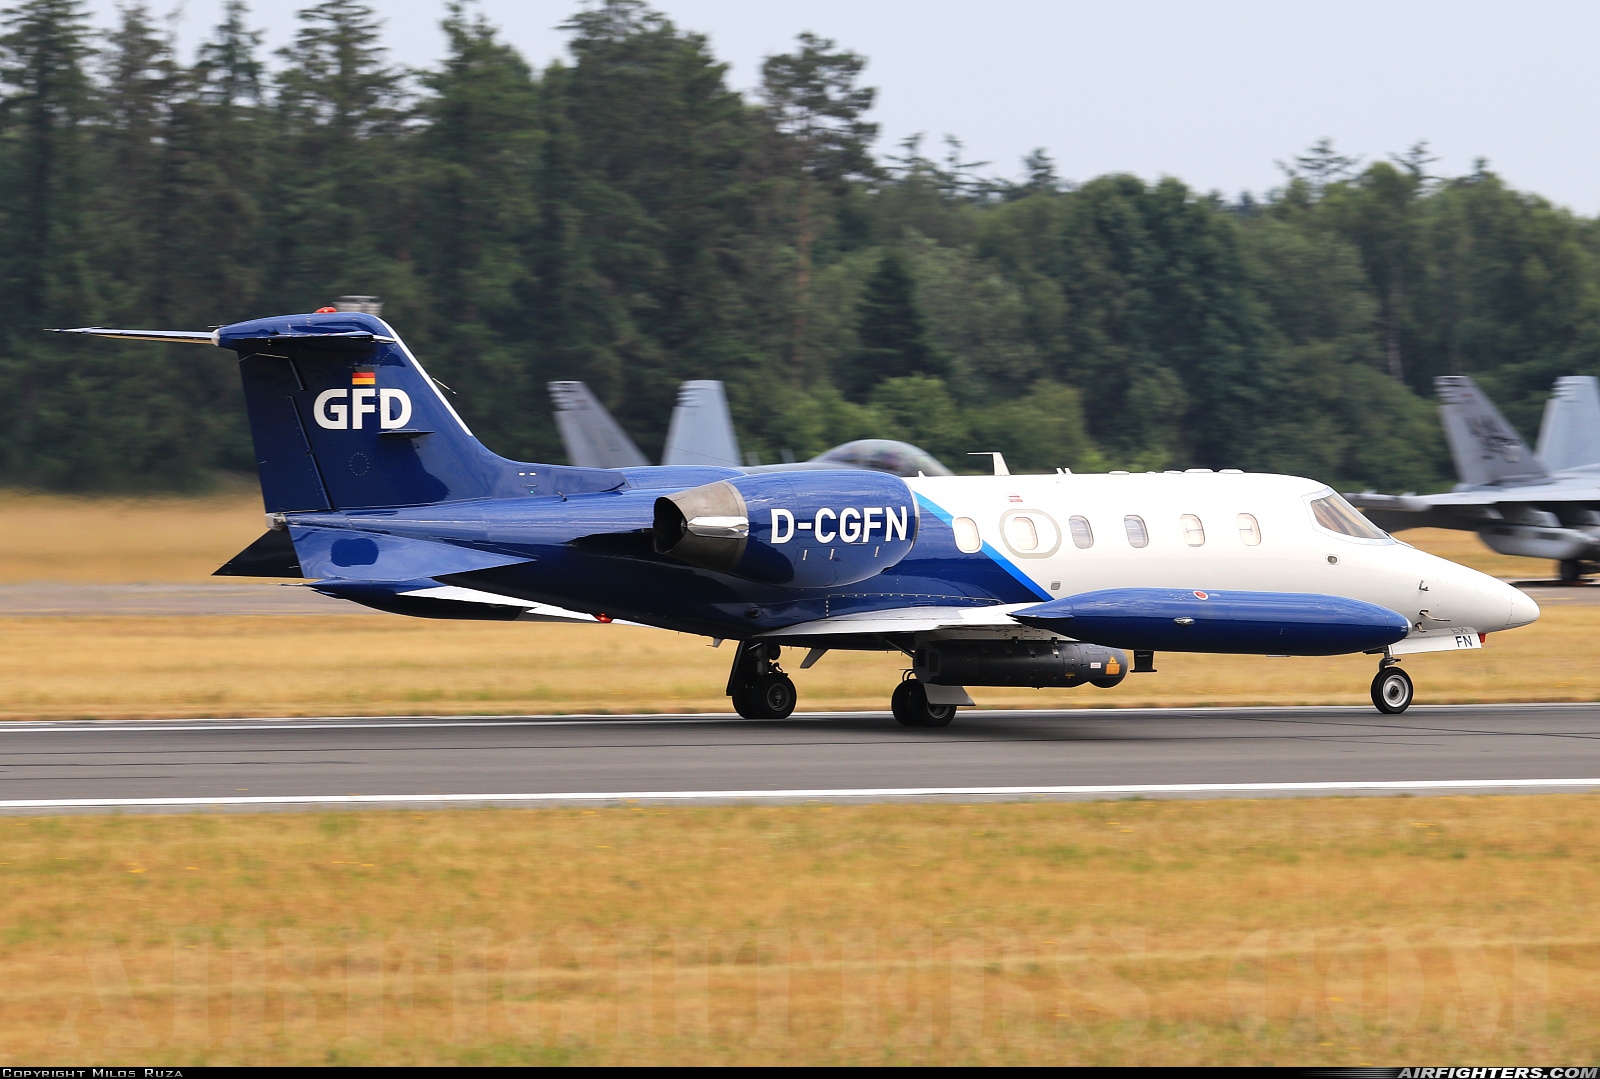 Company Owned - GFD Learjet 35A D-CGFN at Hohn (ETNH), Germany